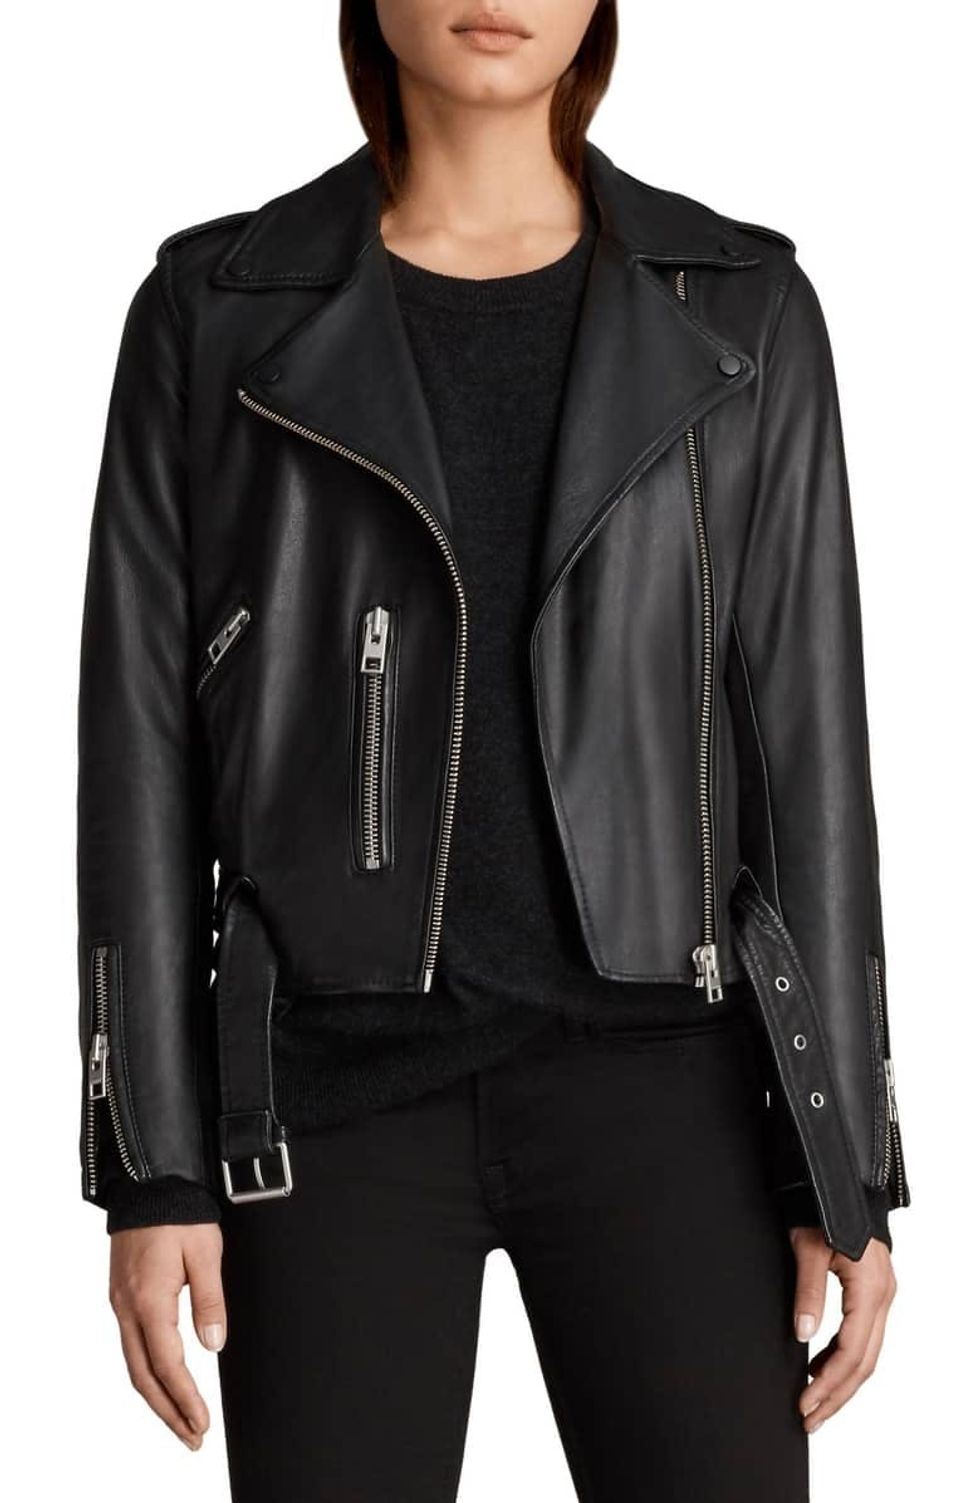 Badass Black Leather Jackets for Every Budget - Brit + Co